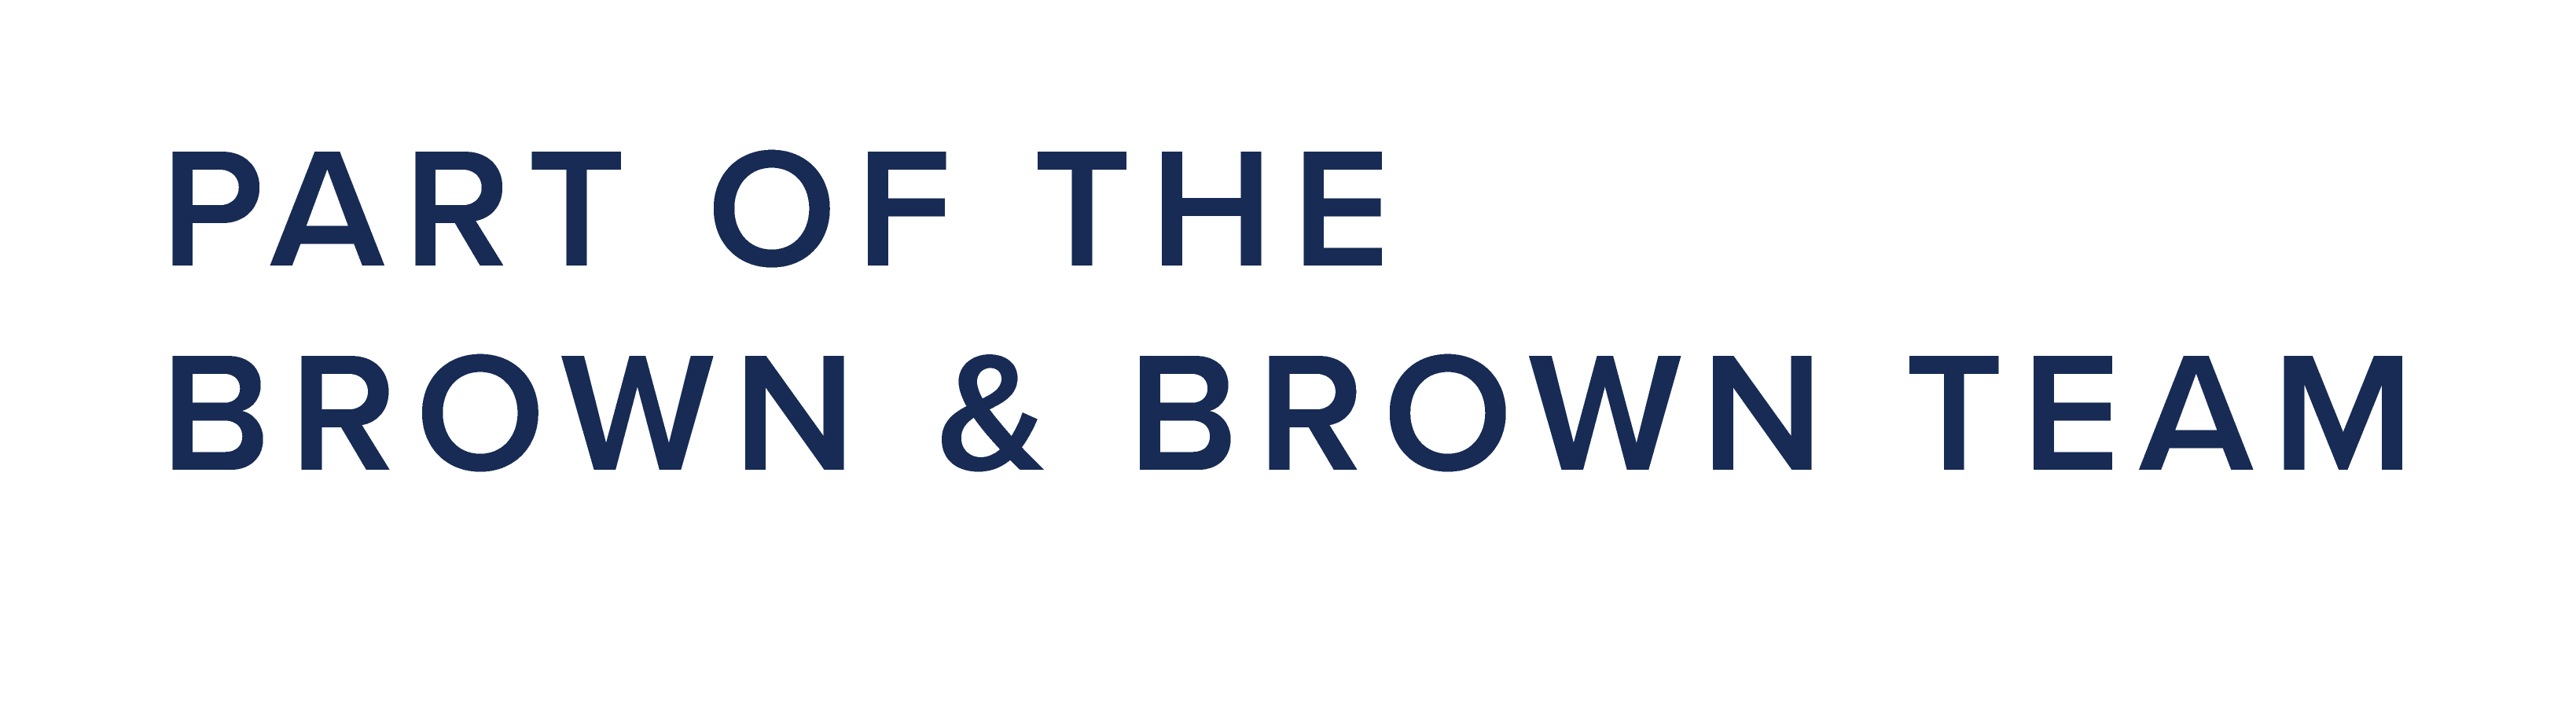 Brown and brown logo